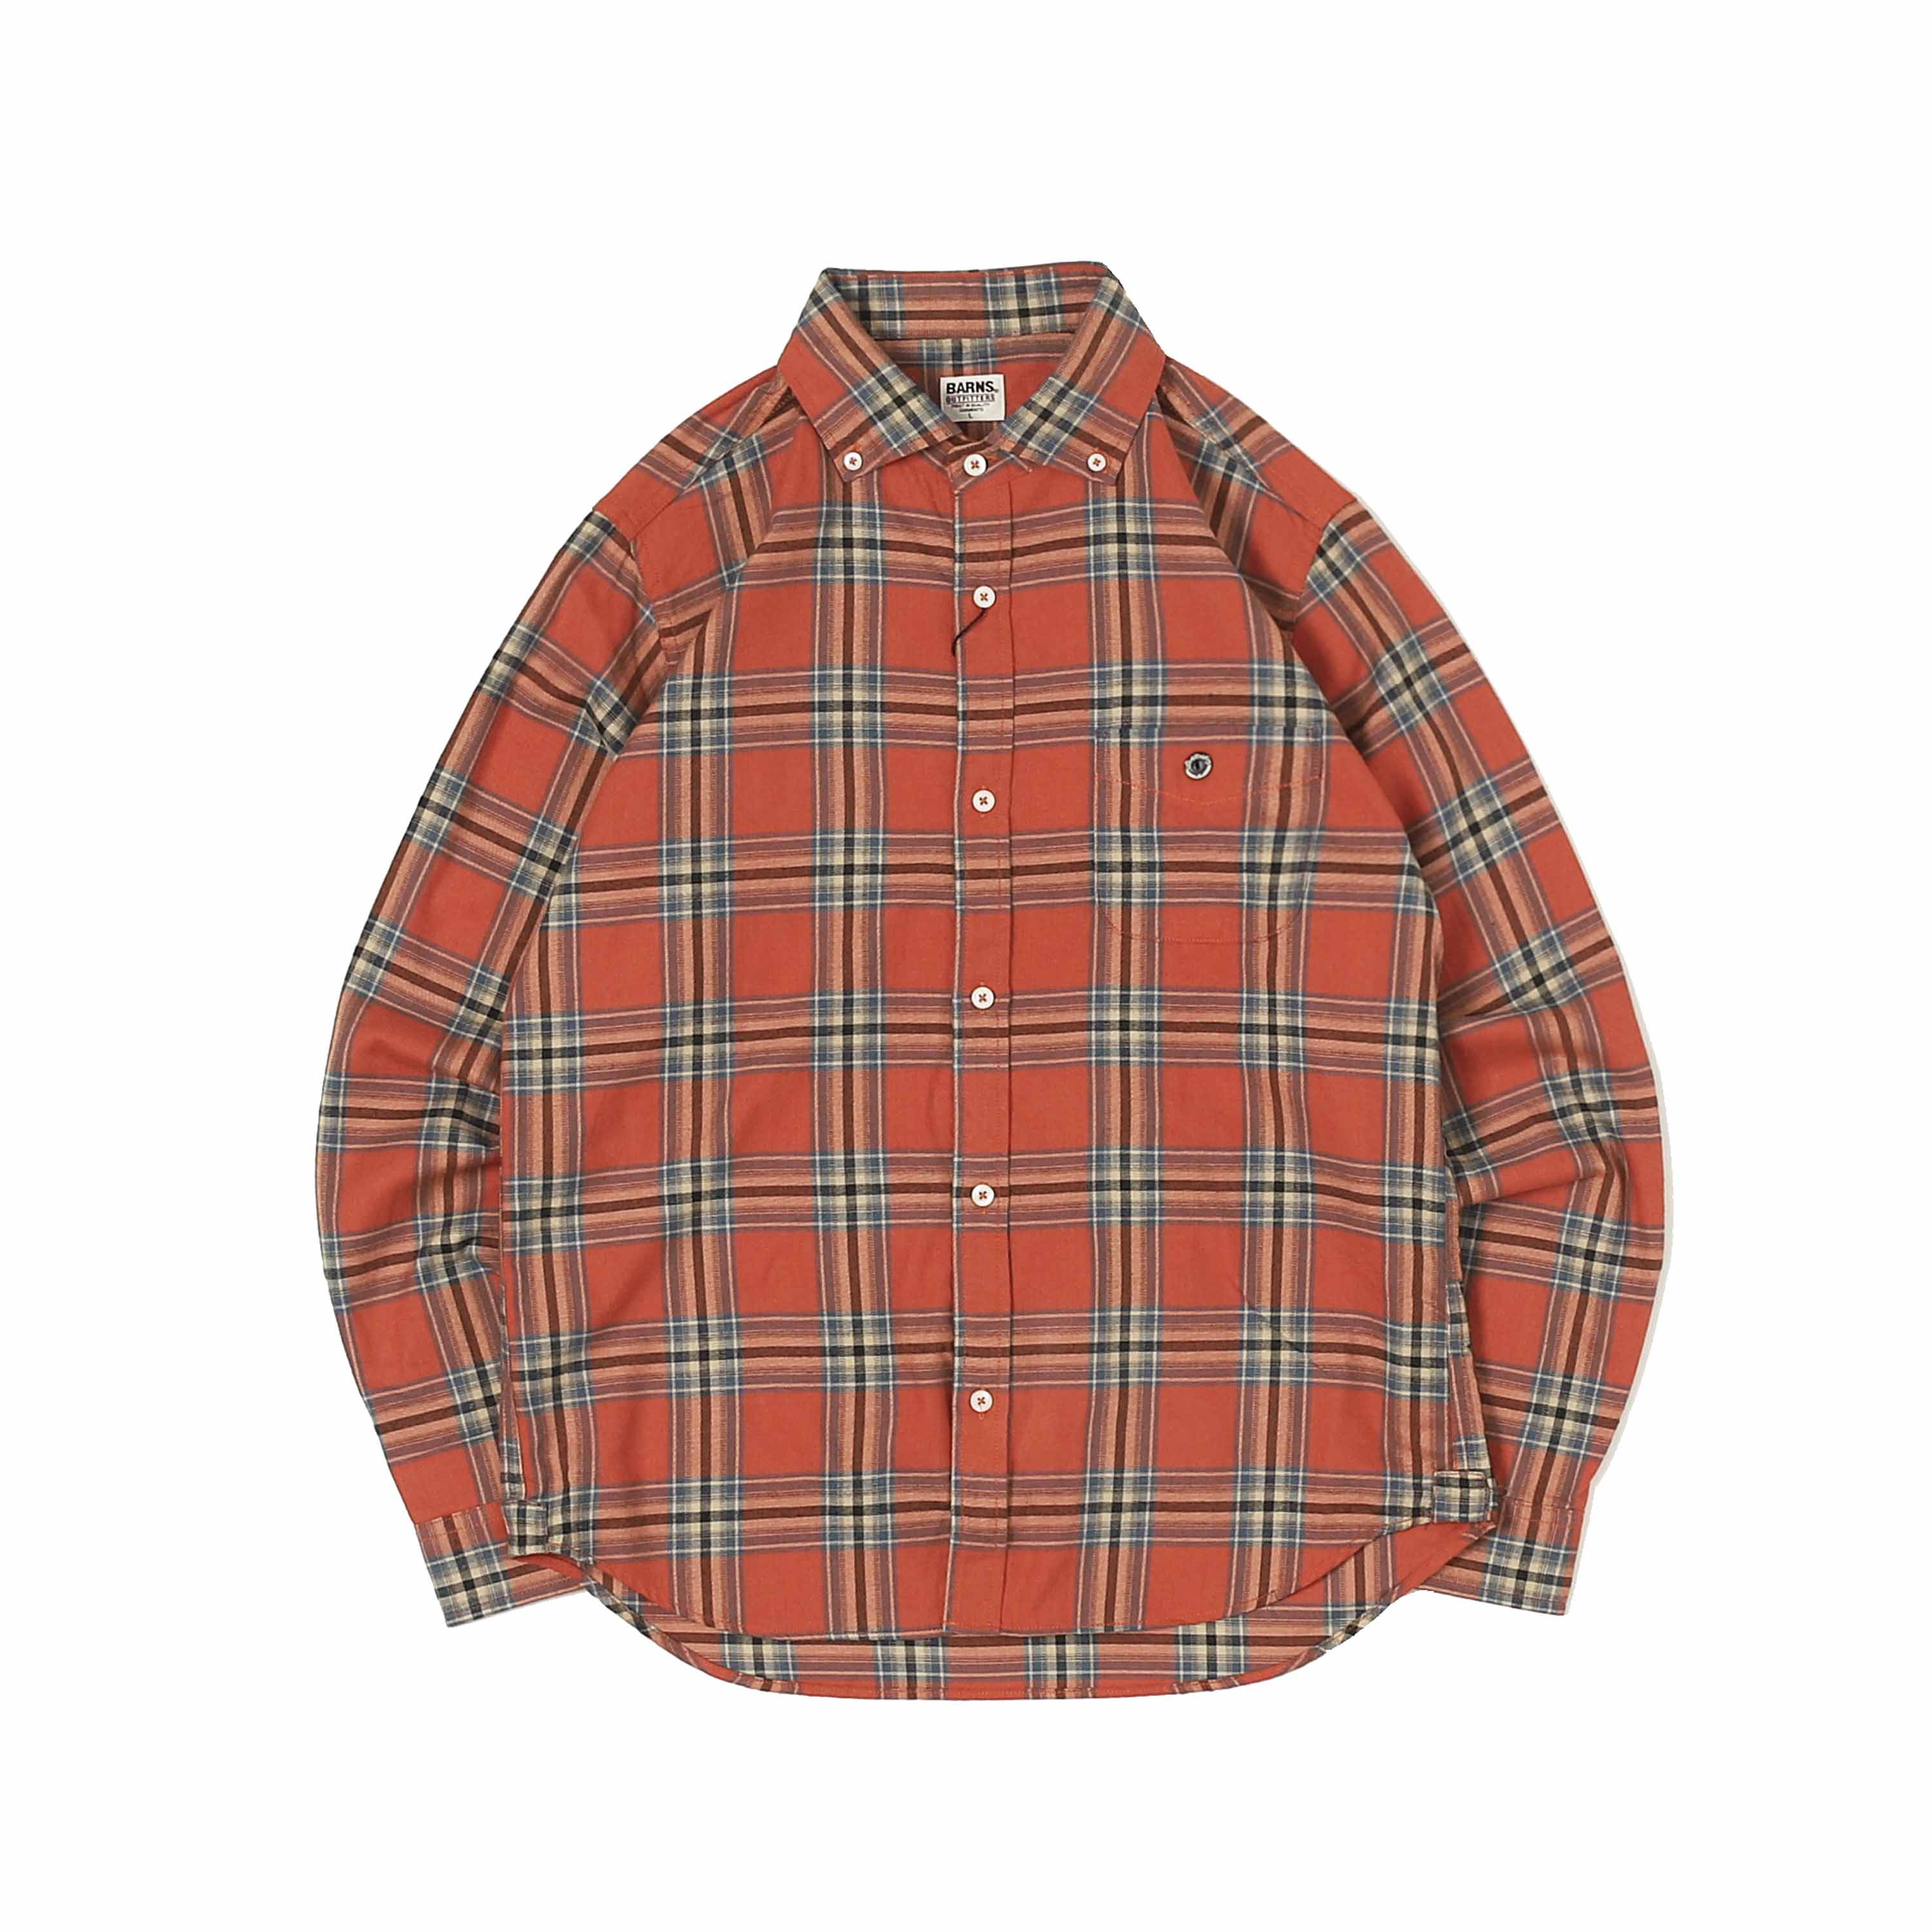 VINTAGE CHECK SHIRTS - RED